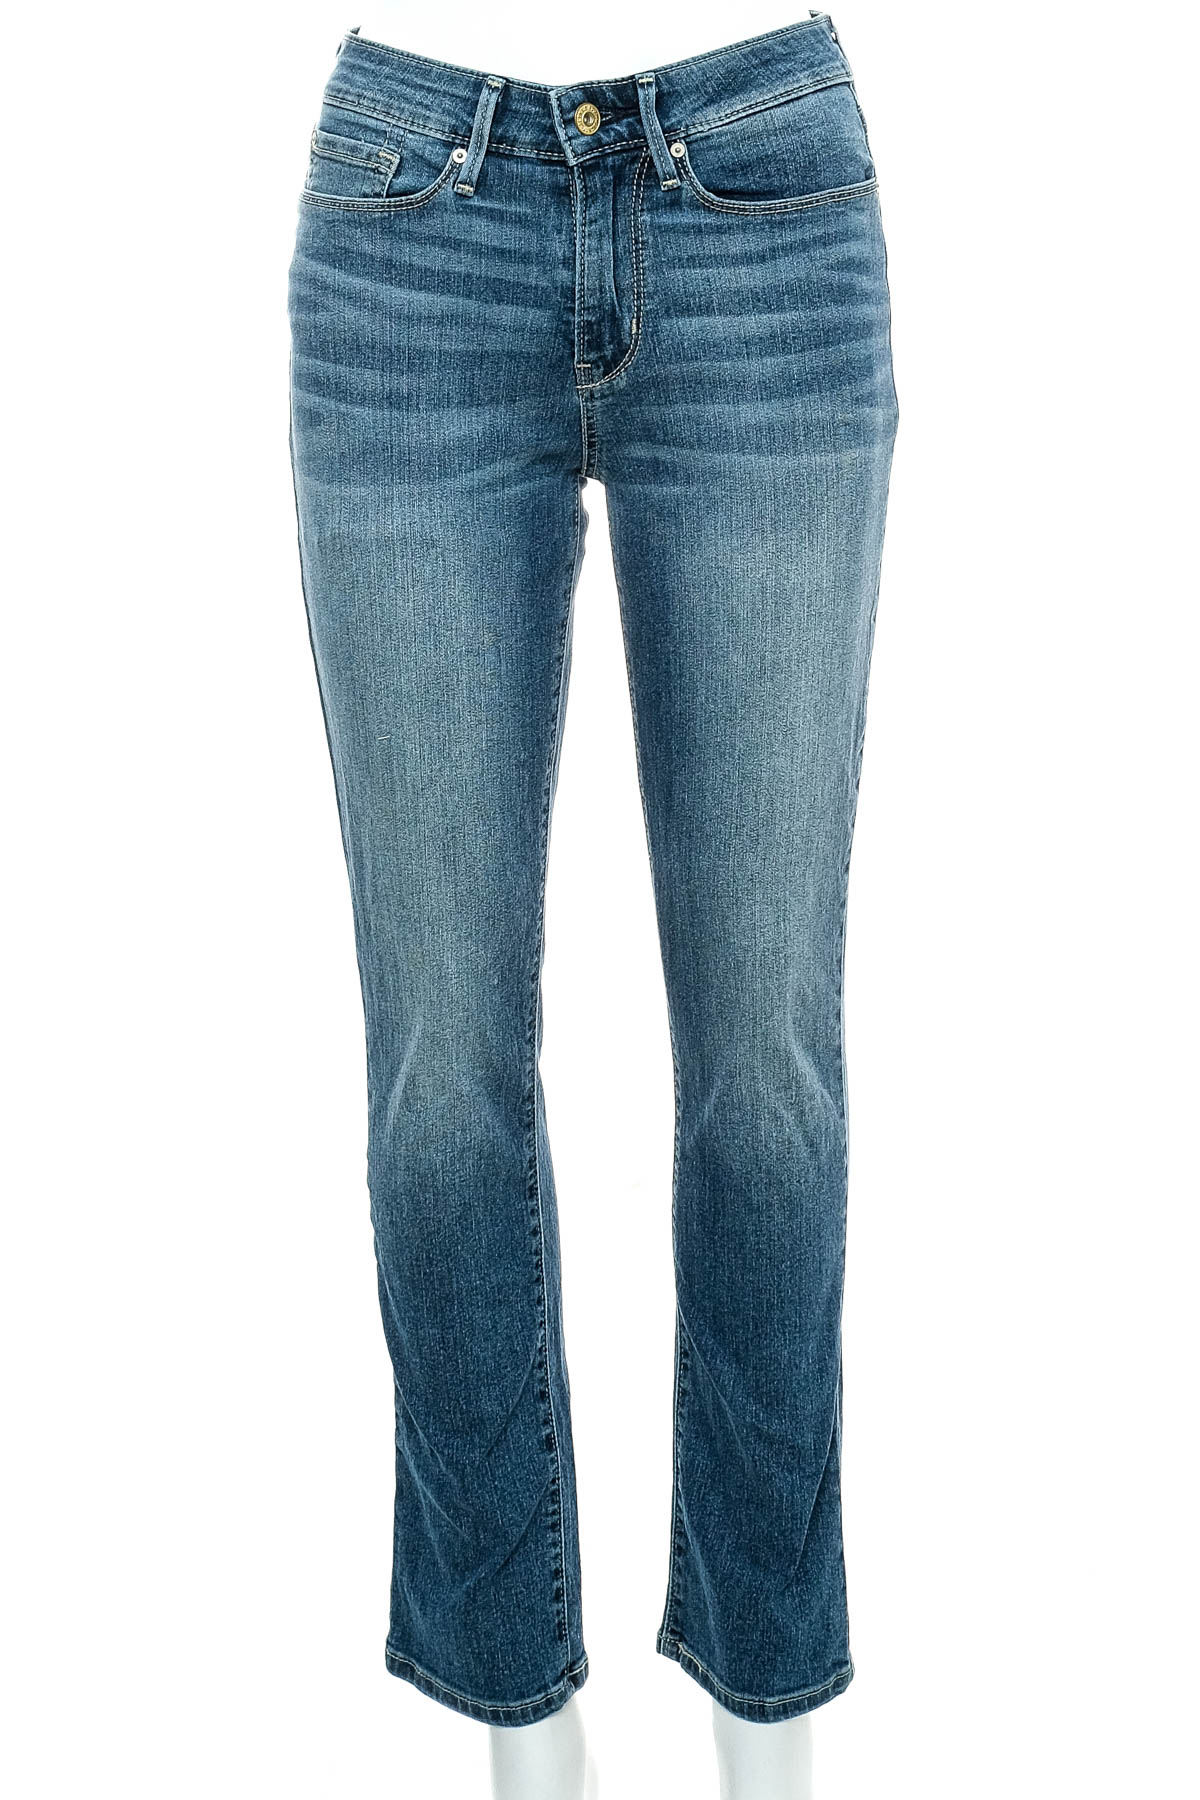 Women's jeans - SIGNATURE BY LEVI STRAUSS & CO. - 0